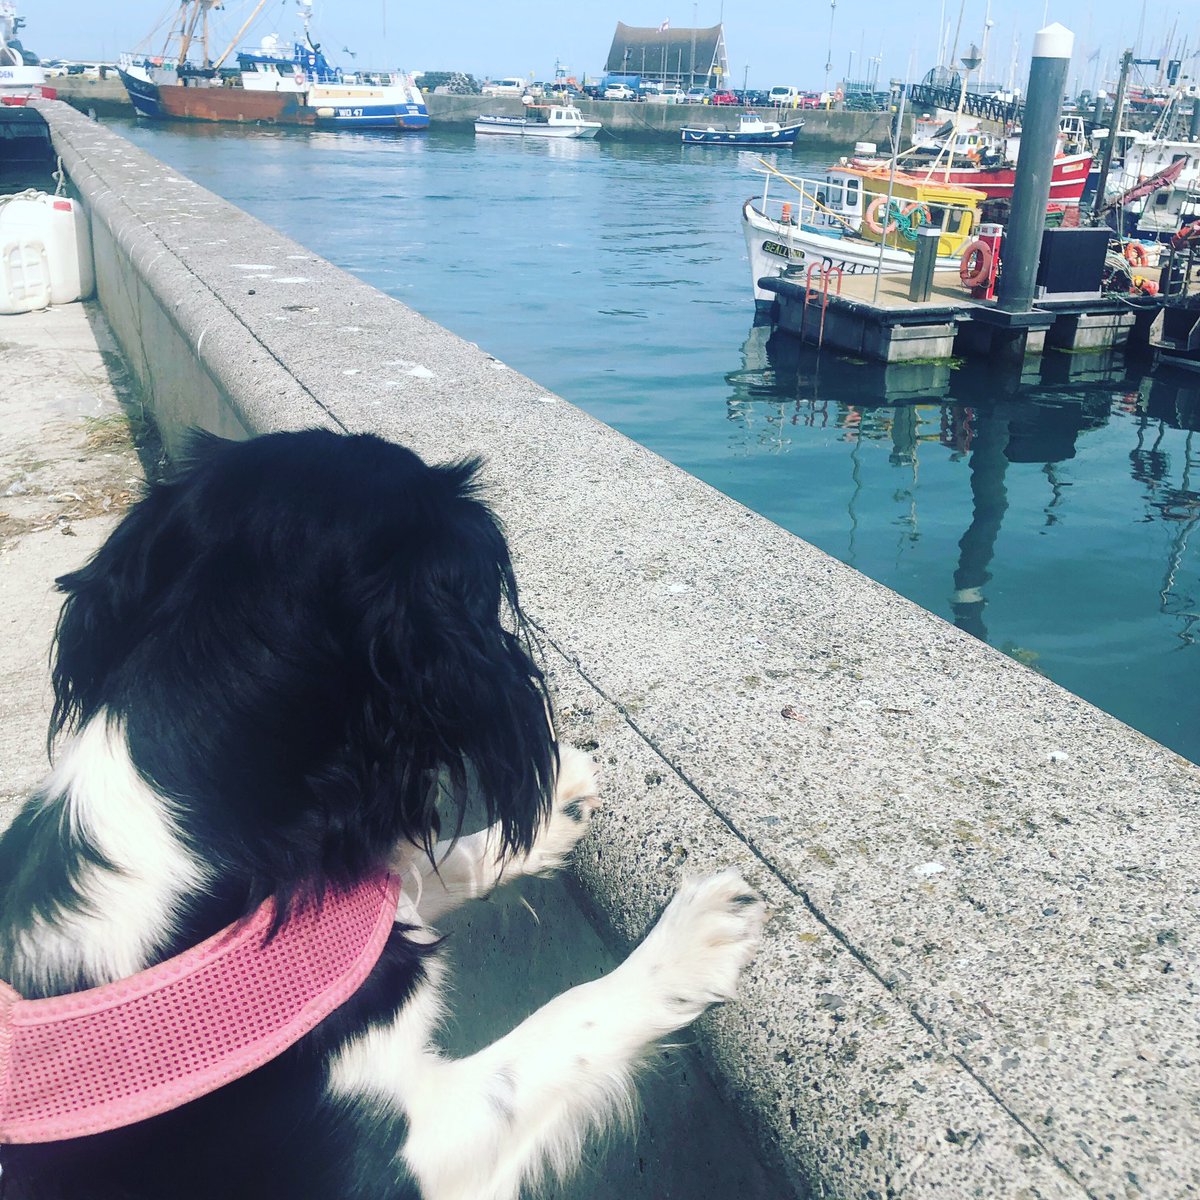 Missy overseeing the landing of the fish in #howthharbour @howthismagic @VisitDublin @LoveFingalDub #howth #hiddenhowth @LovinDublin #ireland #hiddenhowthexperiences #puppy #puppylove